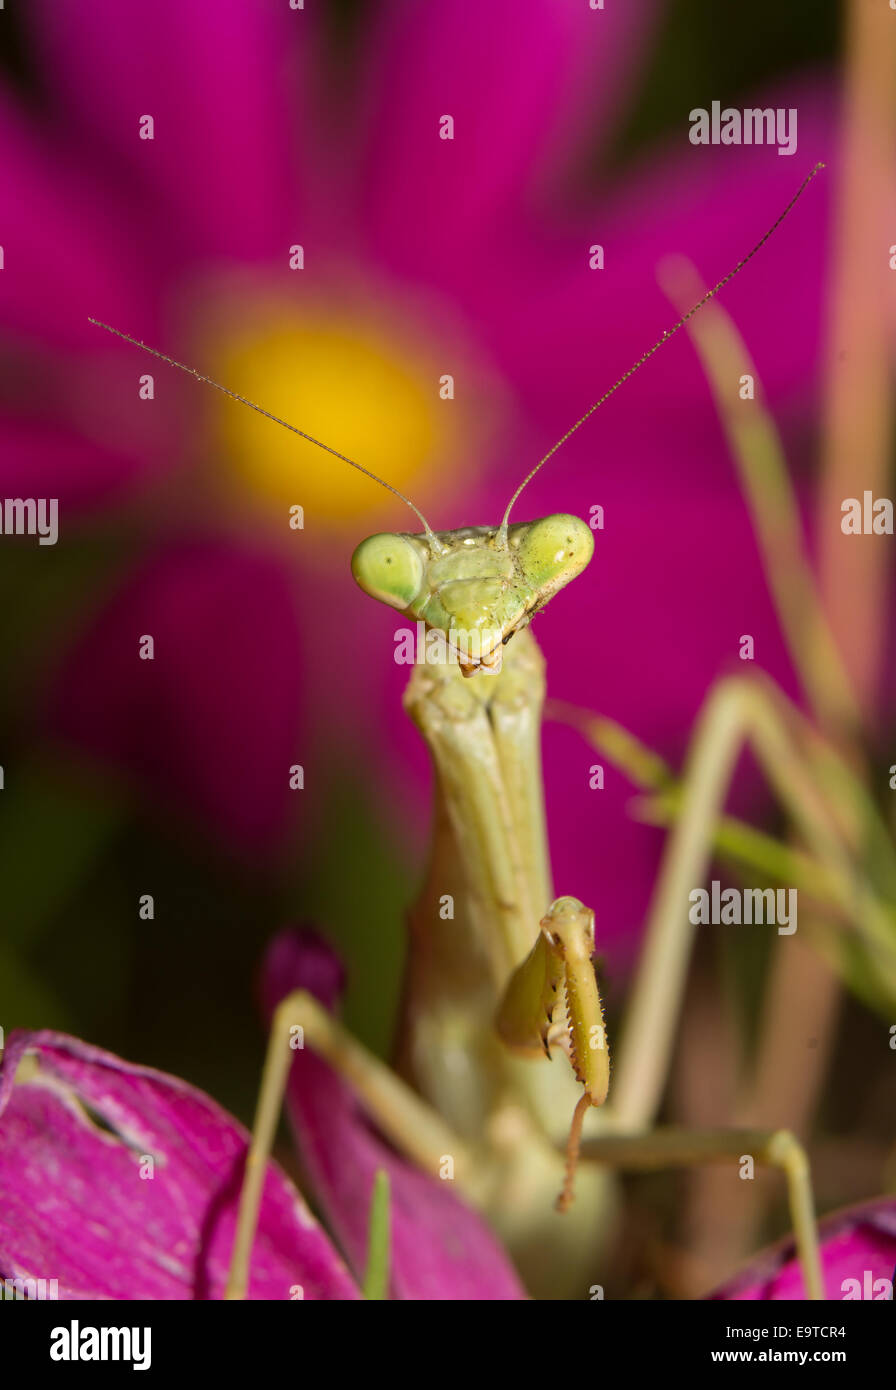 Praying Mantis waiting for prey, with a bright flower on background Stock Photo